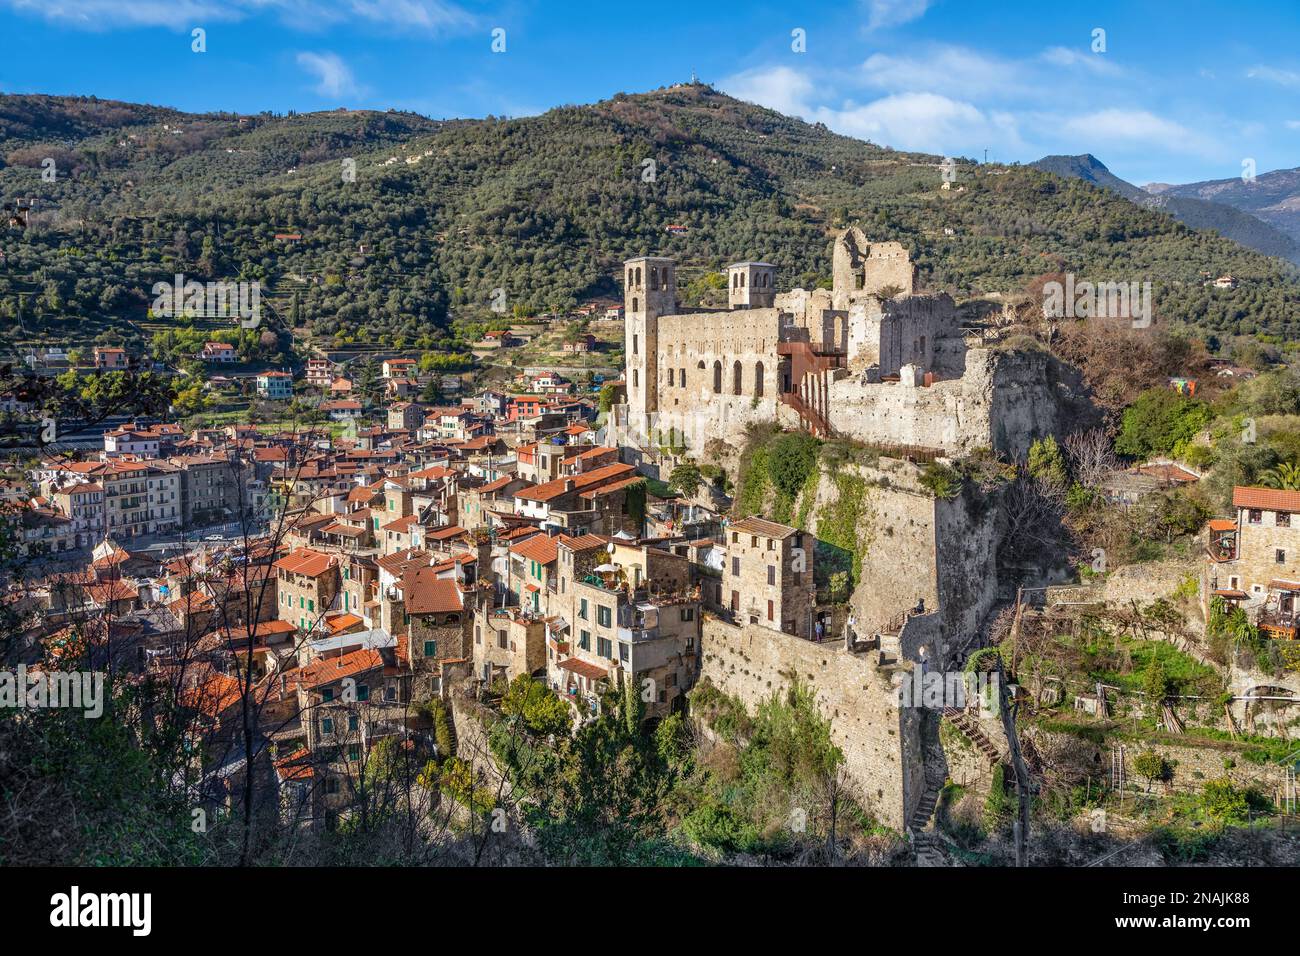 Dolceacqua, Italy - ruins of hilltop castle and cityscape Stock Photo